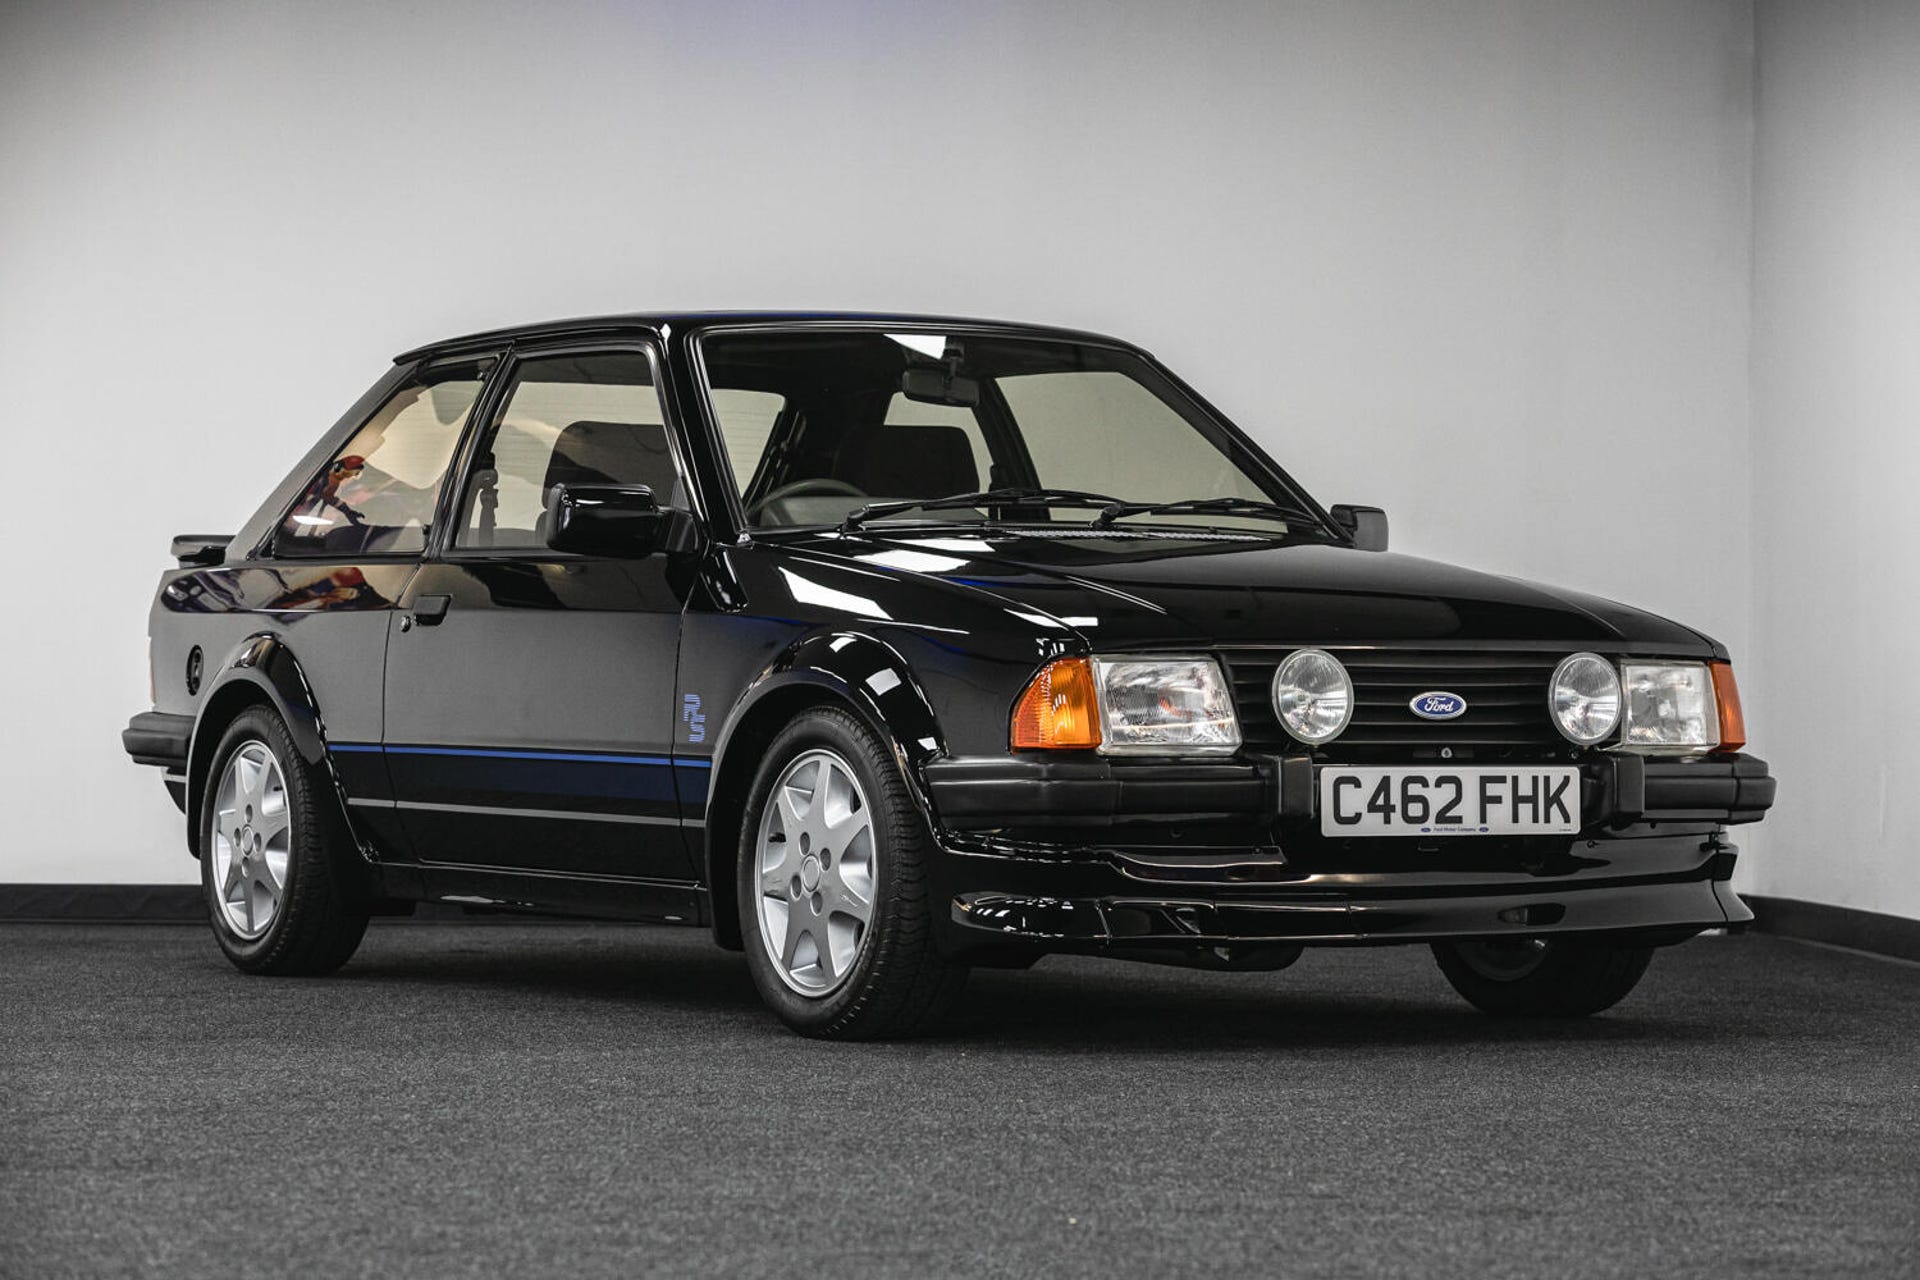 Front 3/4 view of Princess Diana's black 1985 Ford Escort RS Turbo